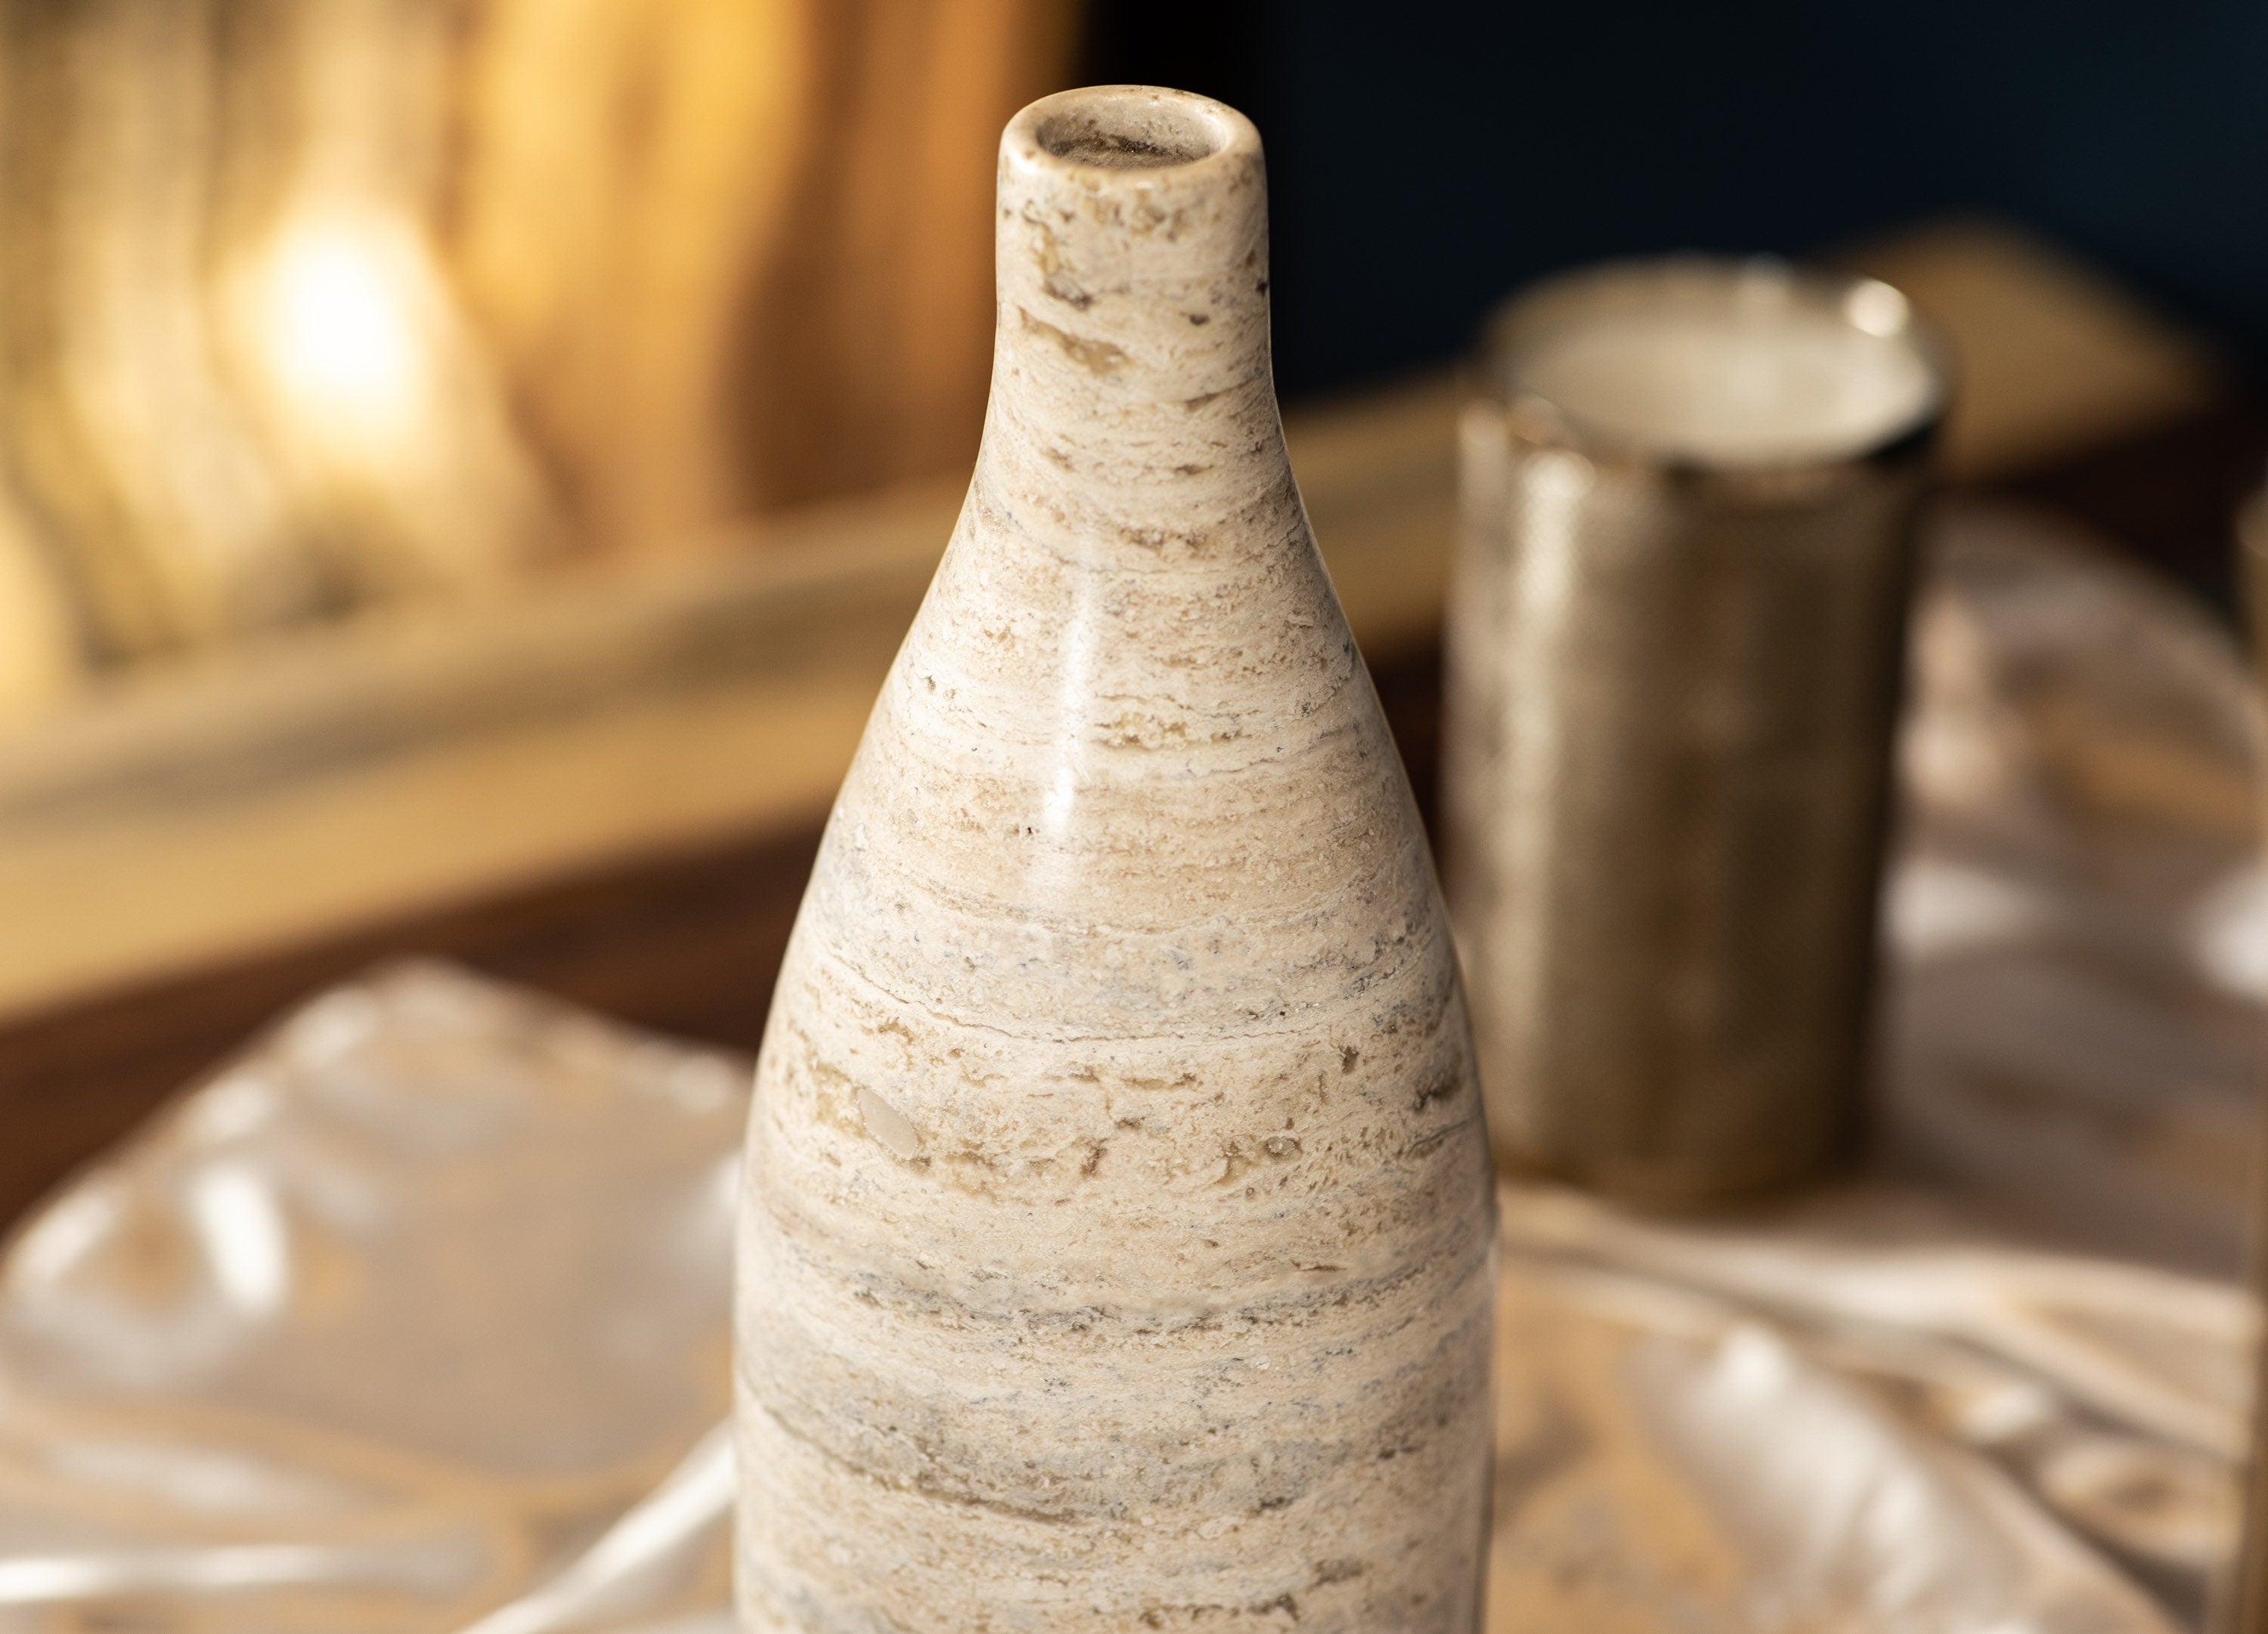 Handcrafted Vase - One of a Kind Decor